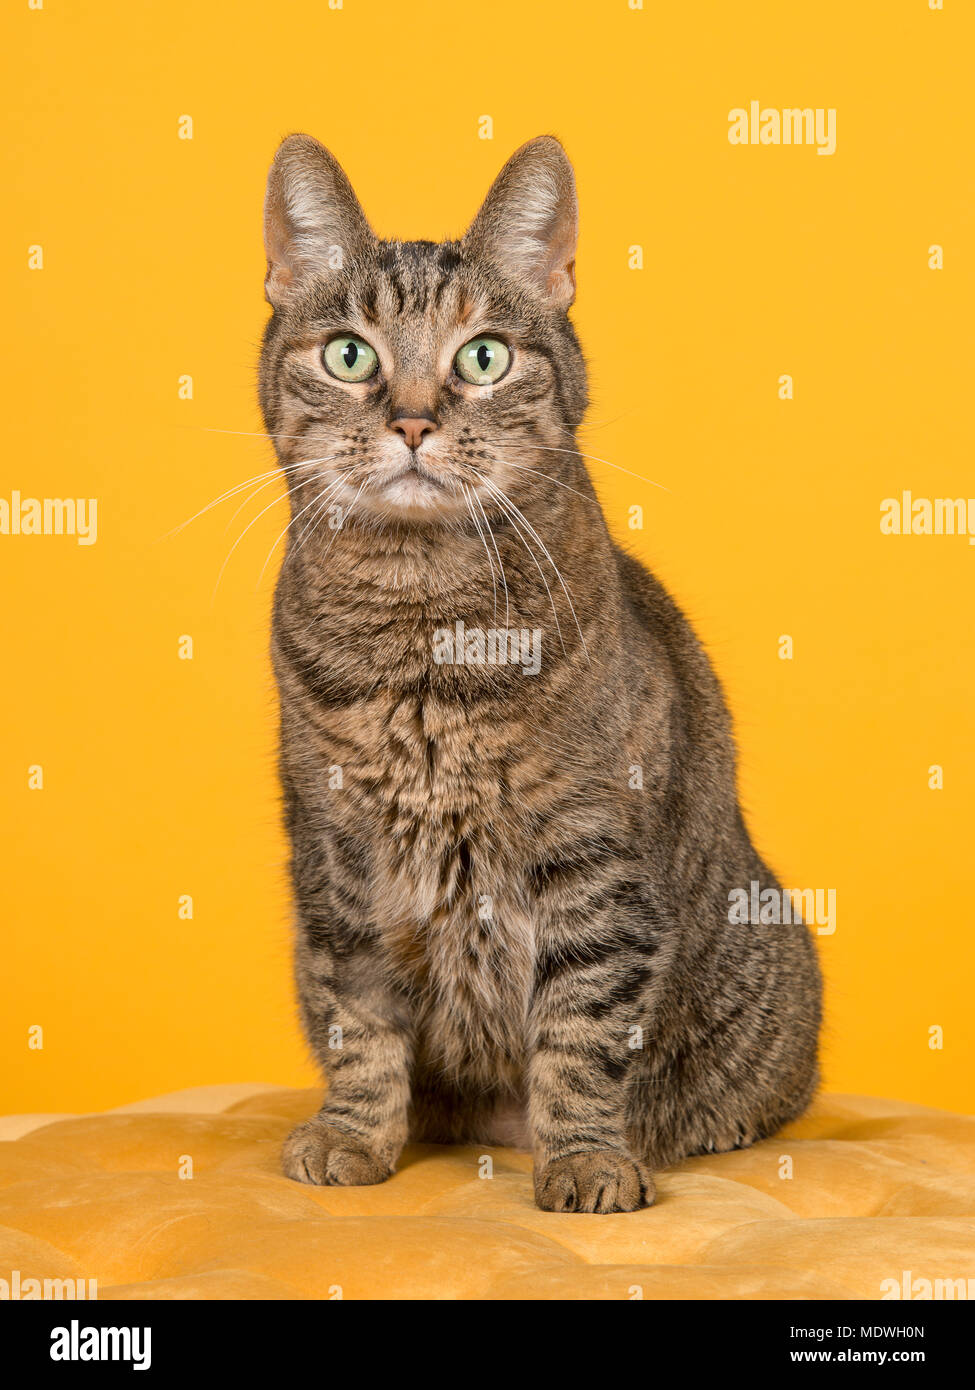 Female tabby cat sitting on a yellow pouf looking at the camera on a yellow background Stock Photo